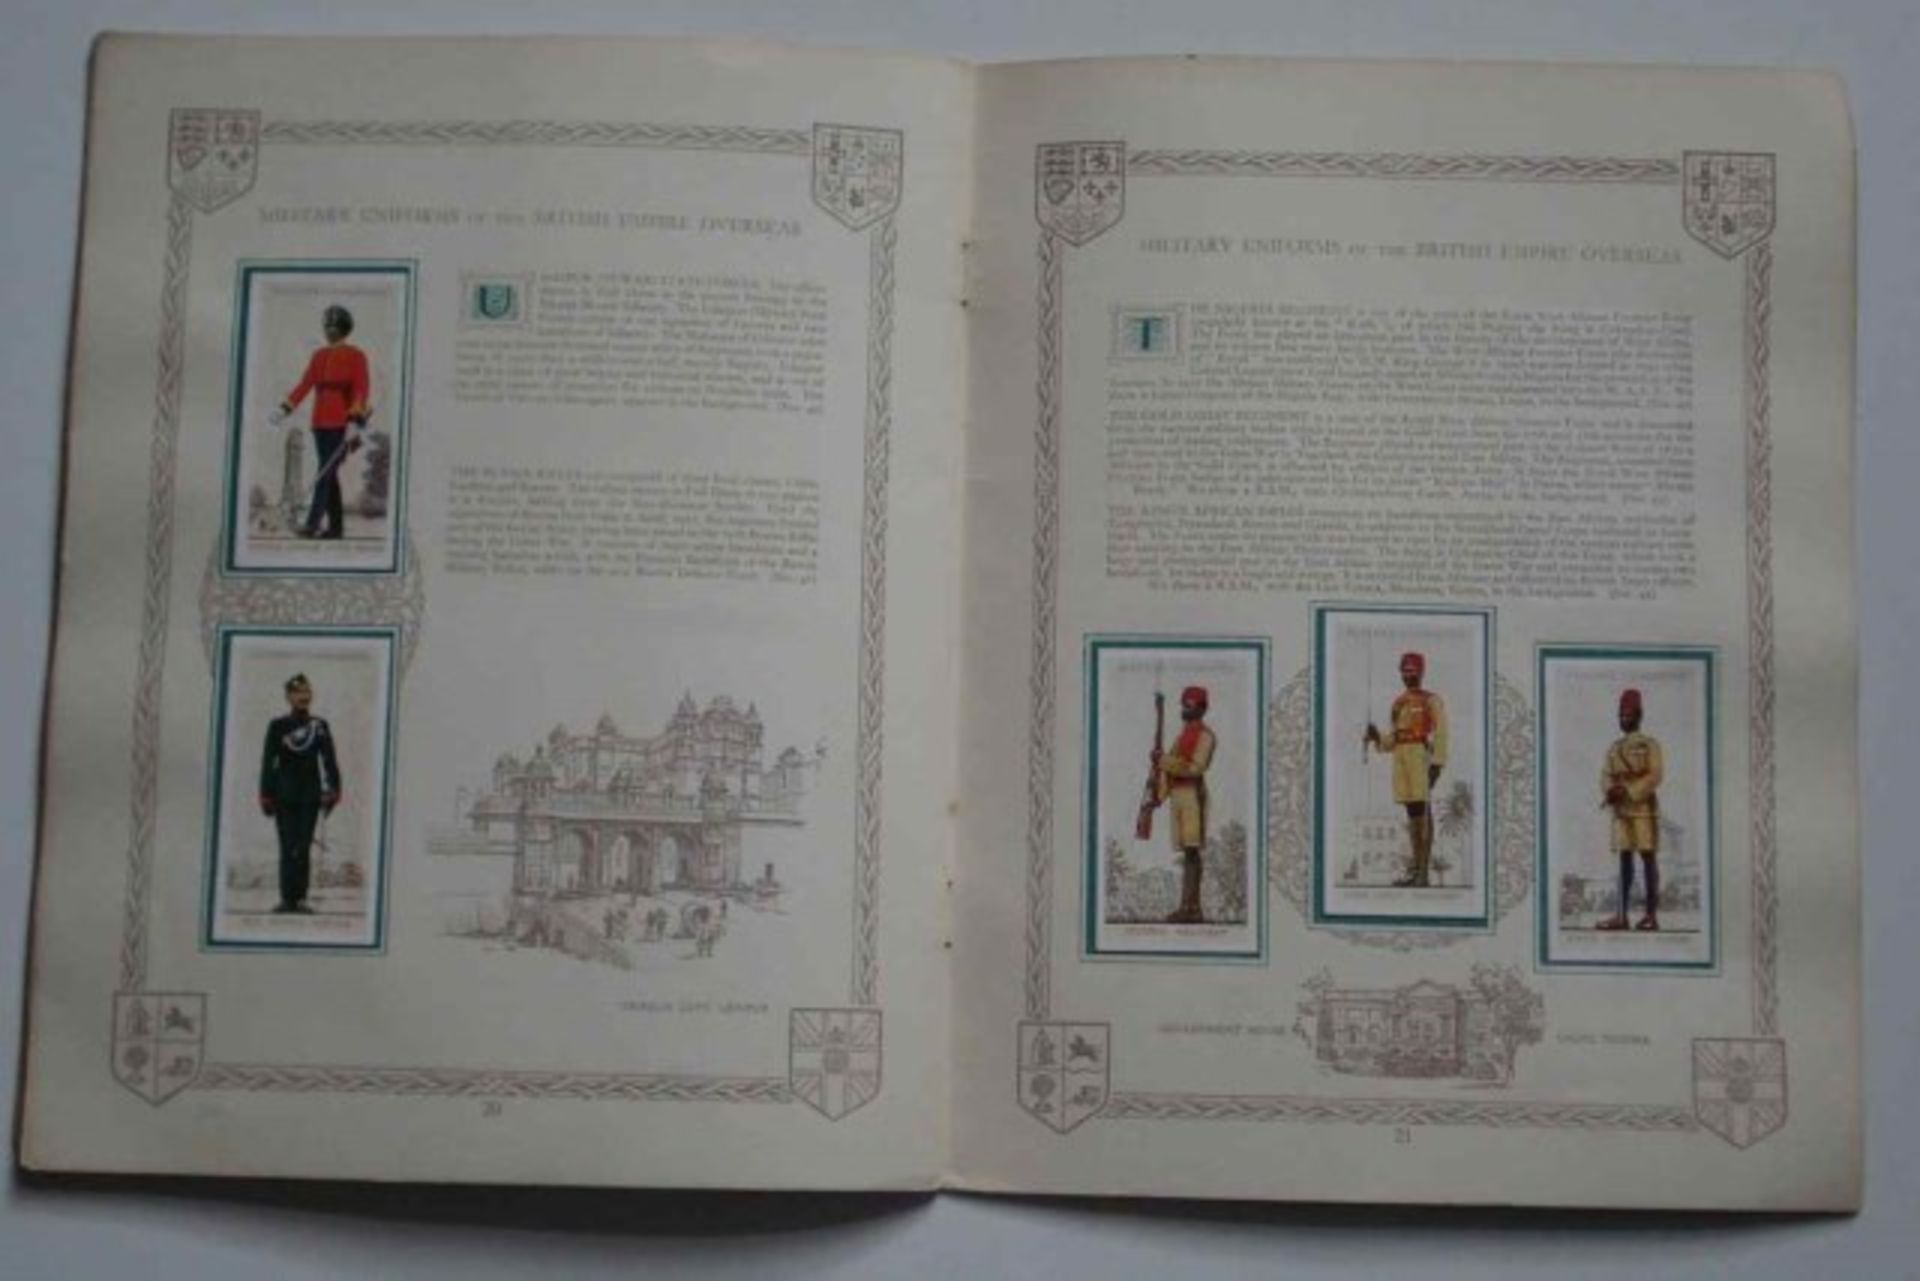 Large Old Complete Cigarette Card Album - Military Uniforms of the British Empire Overseas - Image 2 of 3